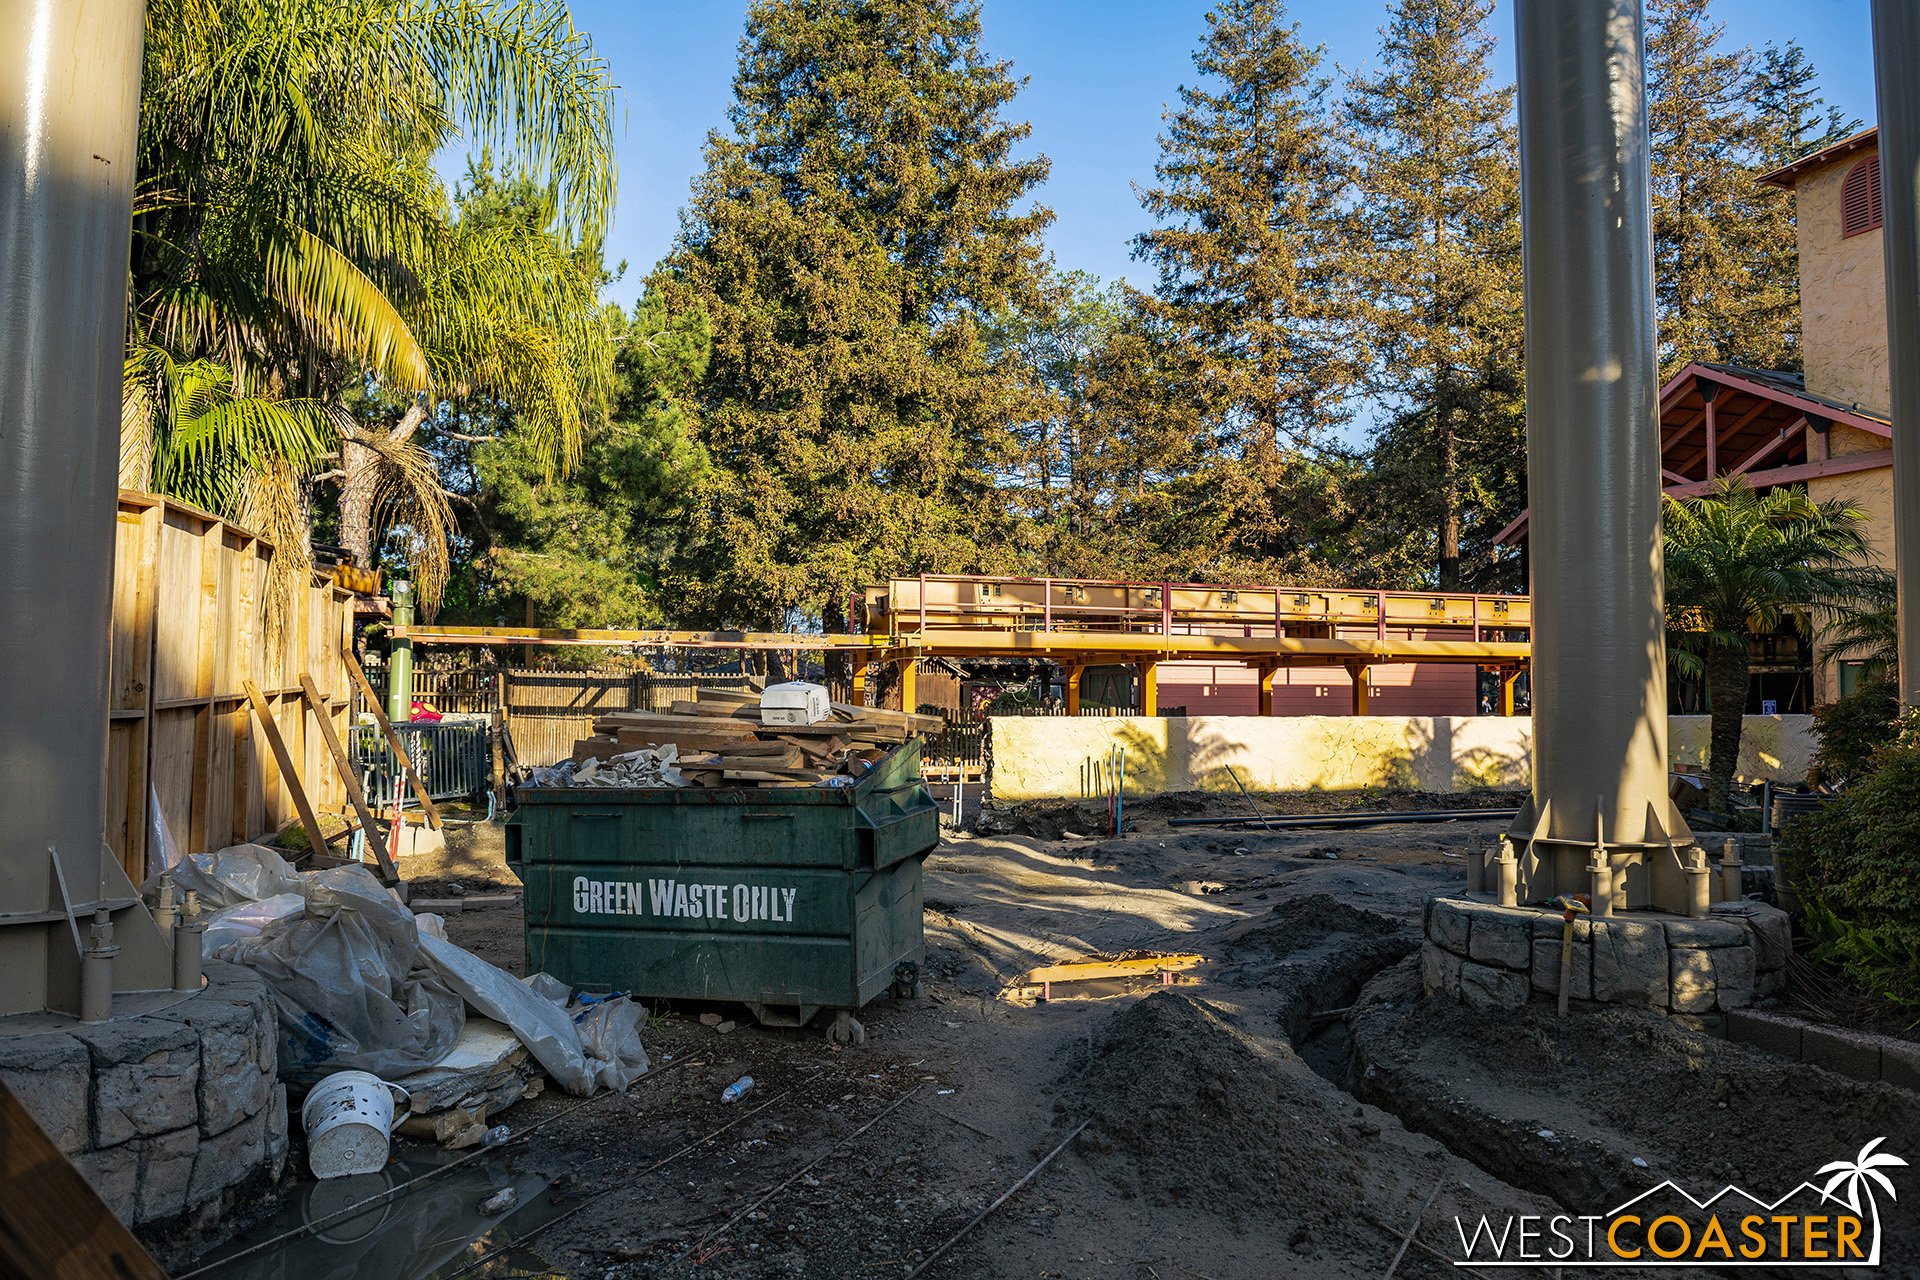  Over by Montezooma, the queue has been pretty disassembled, and entrance area has been demolished down to bare dirt. 